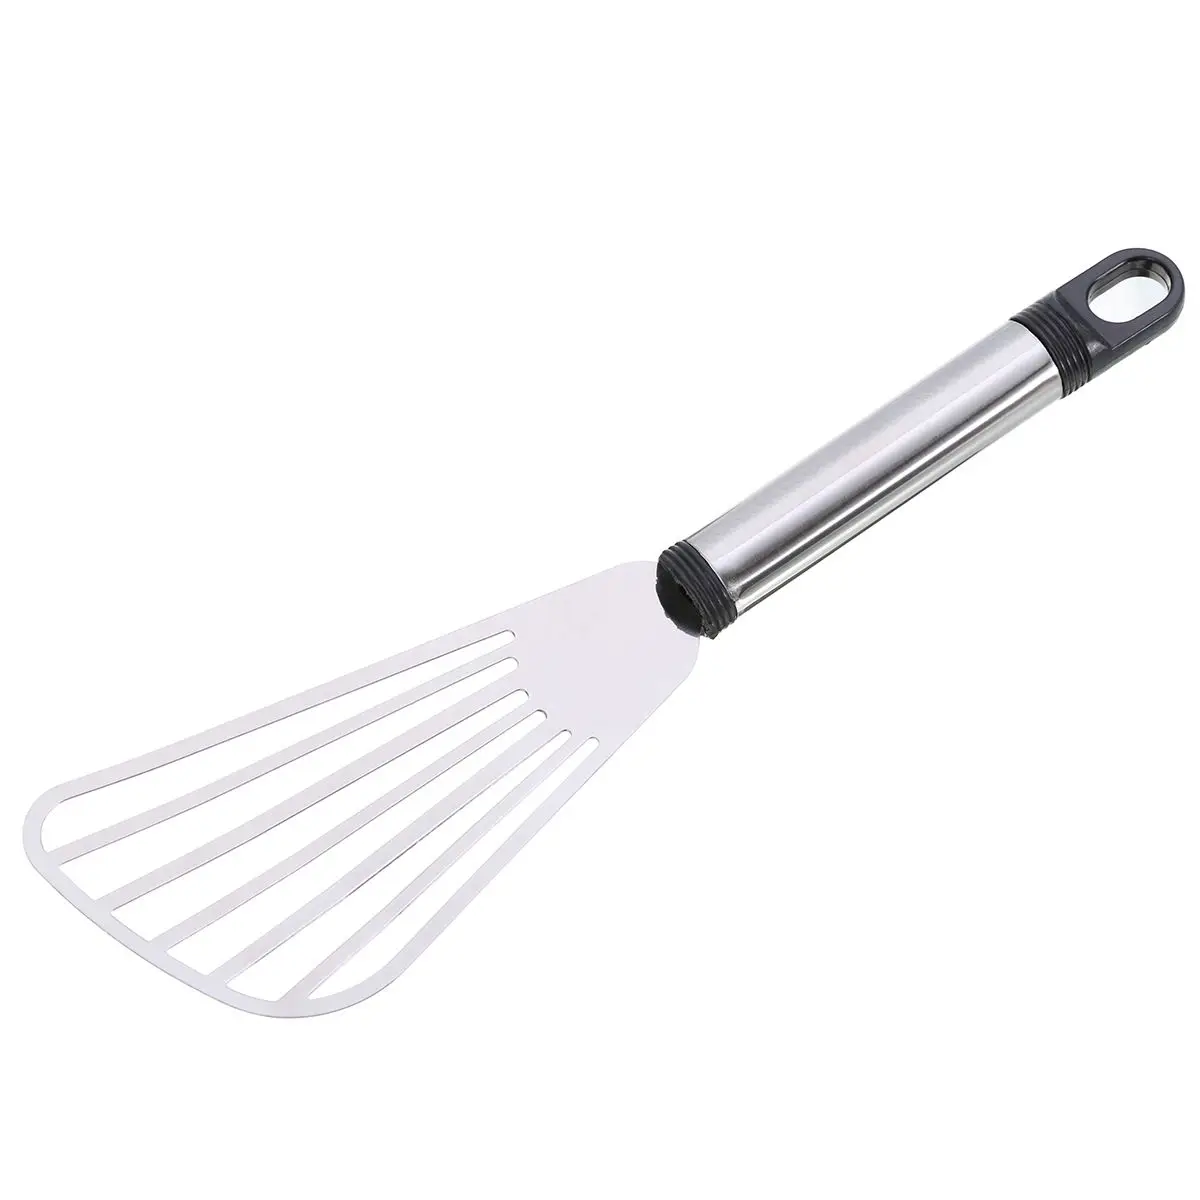 Stainless Steel Fish Frying Spatula Leaky Shovel Kitchen Supply Tool New